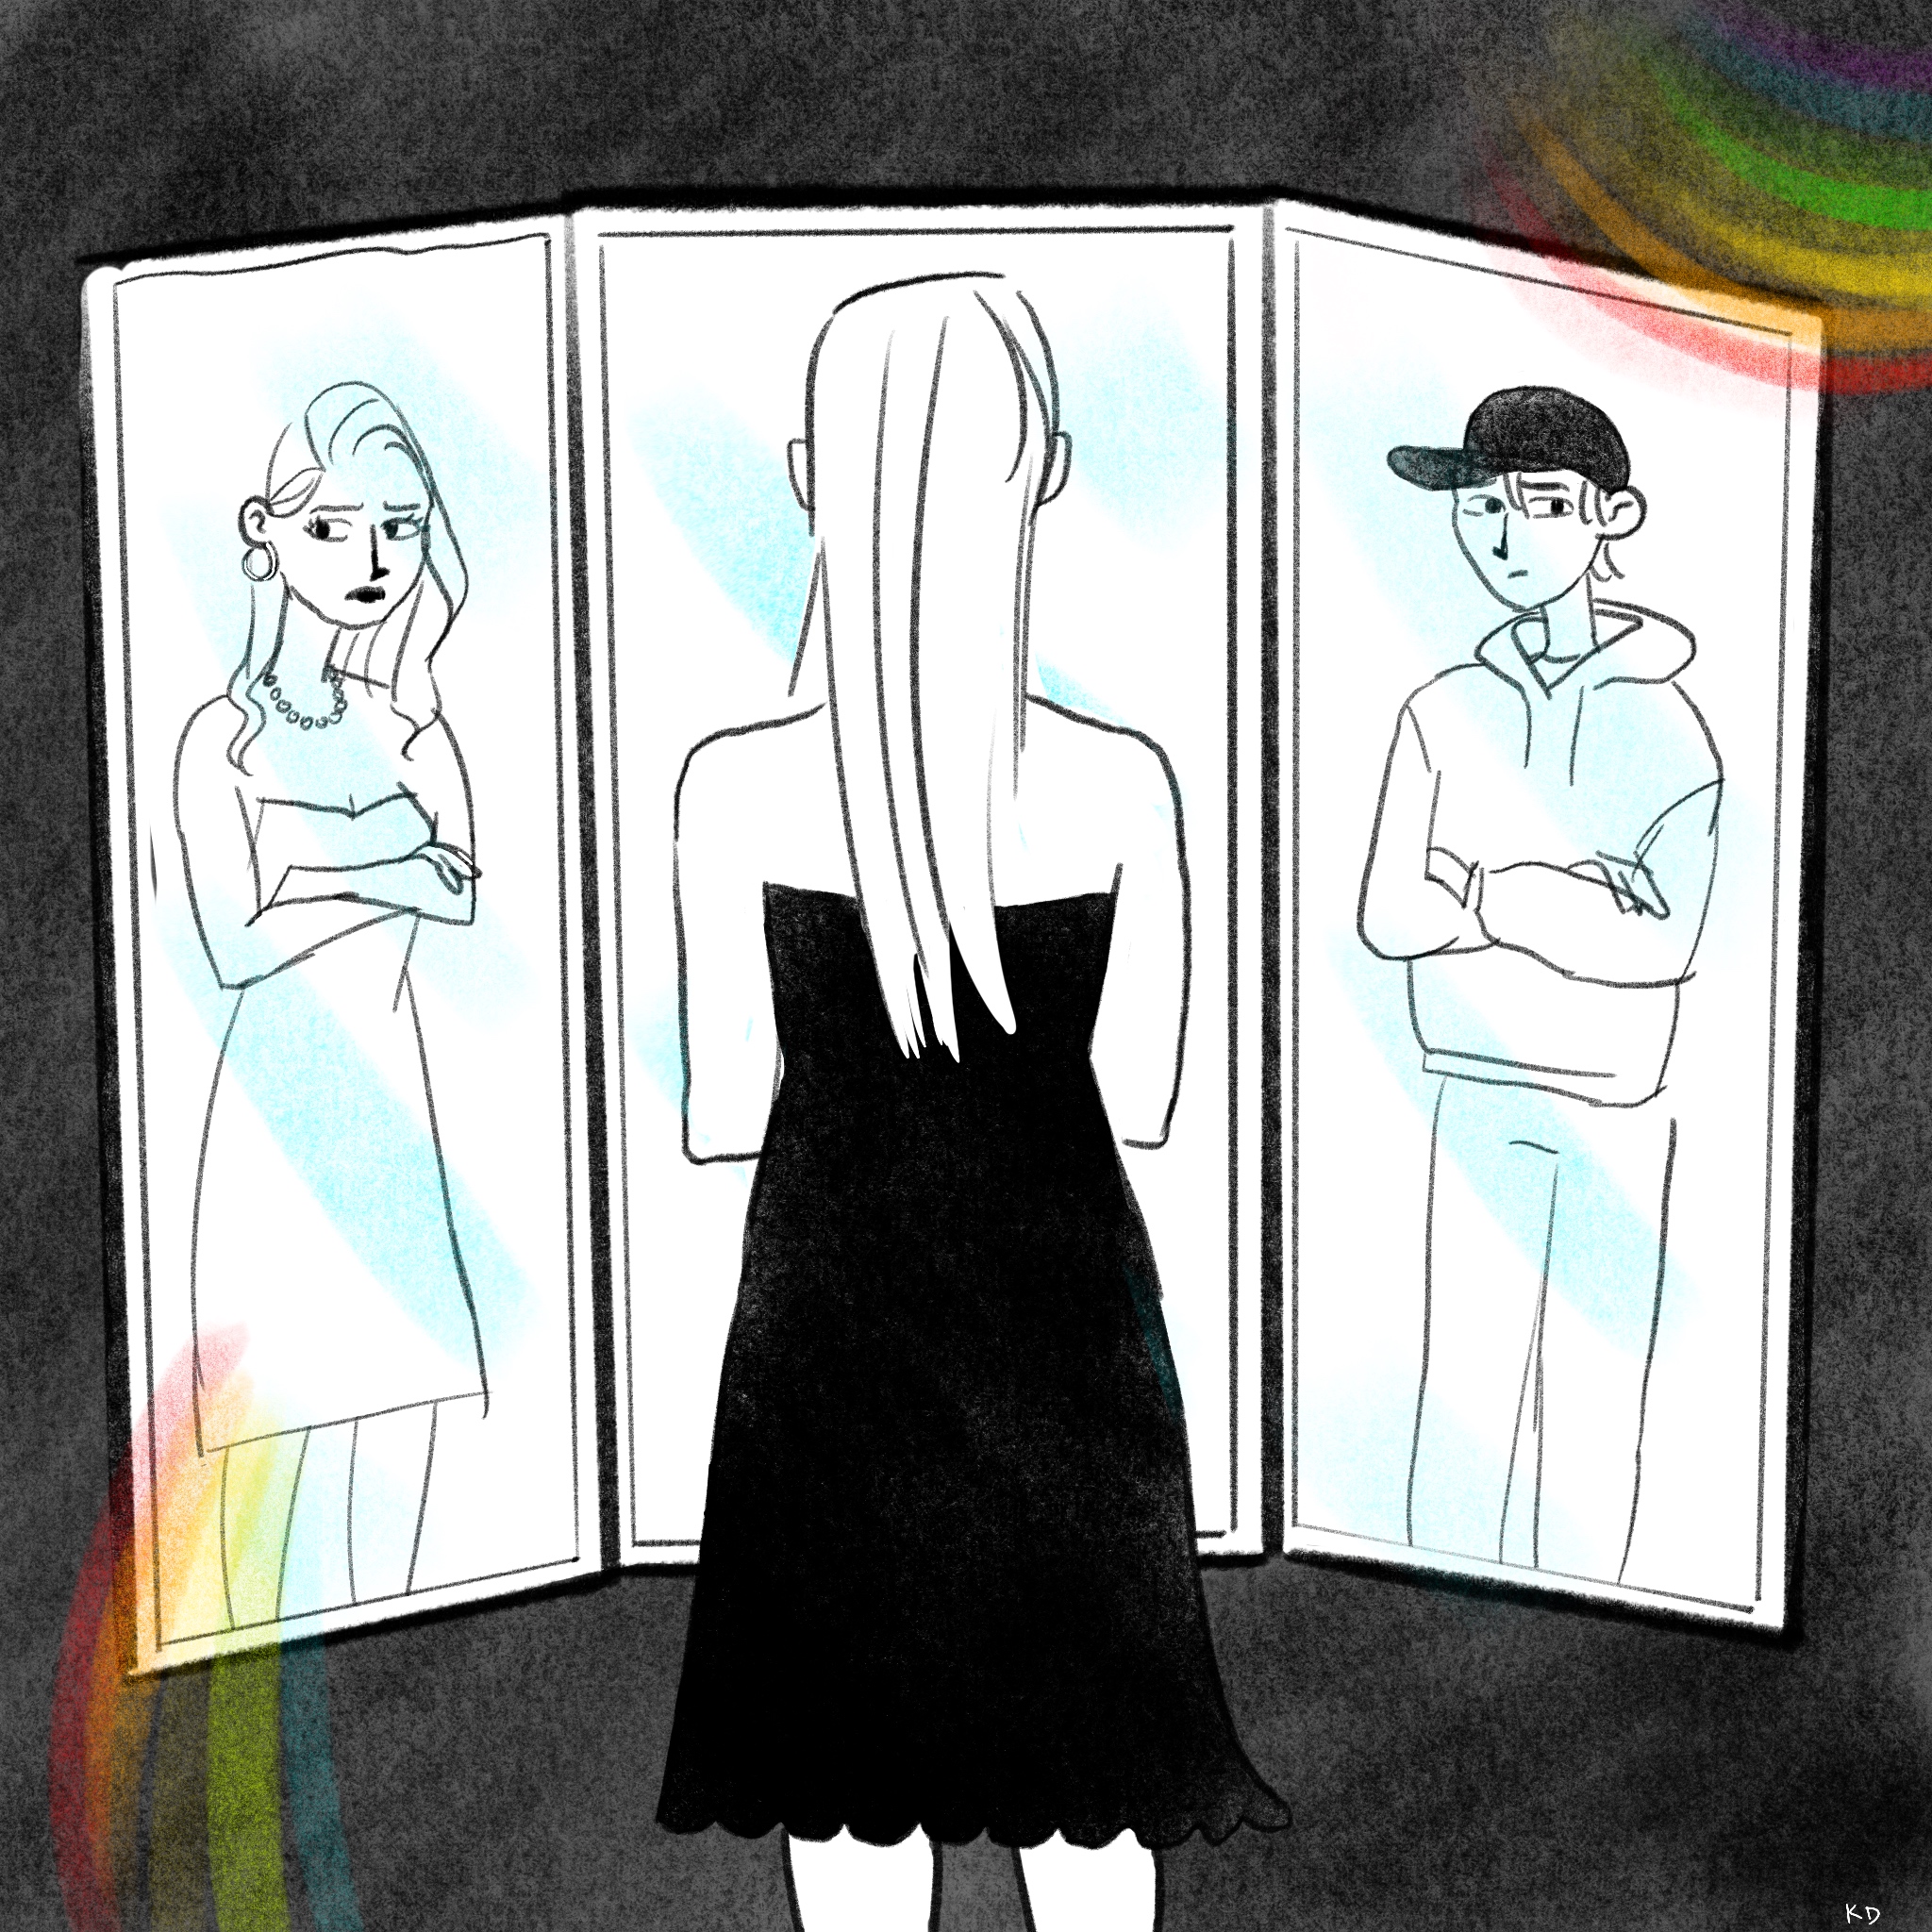 illustration of a person with long hair and a black dress looking into a tri-fold mirror. one side of their reflection shows a woman with styled long hair, jewelry, and a strapless black dress. the other side shows a masculine figure with a baseball cap, sweatshirt, and jeans